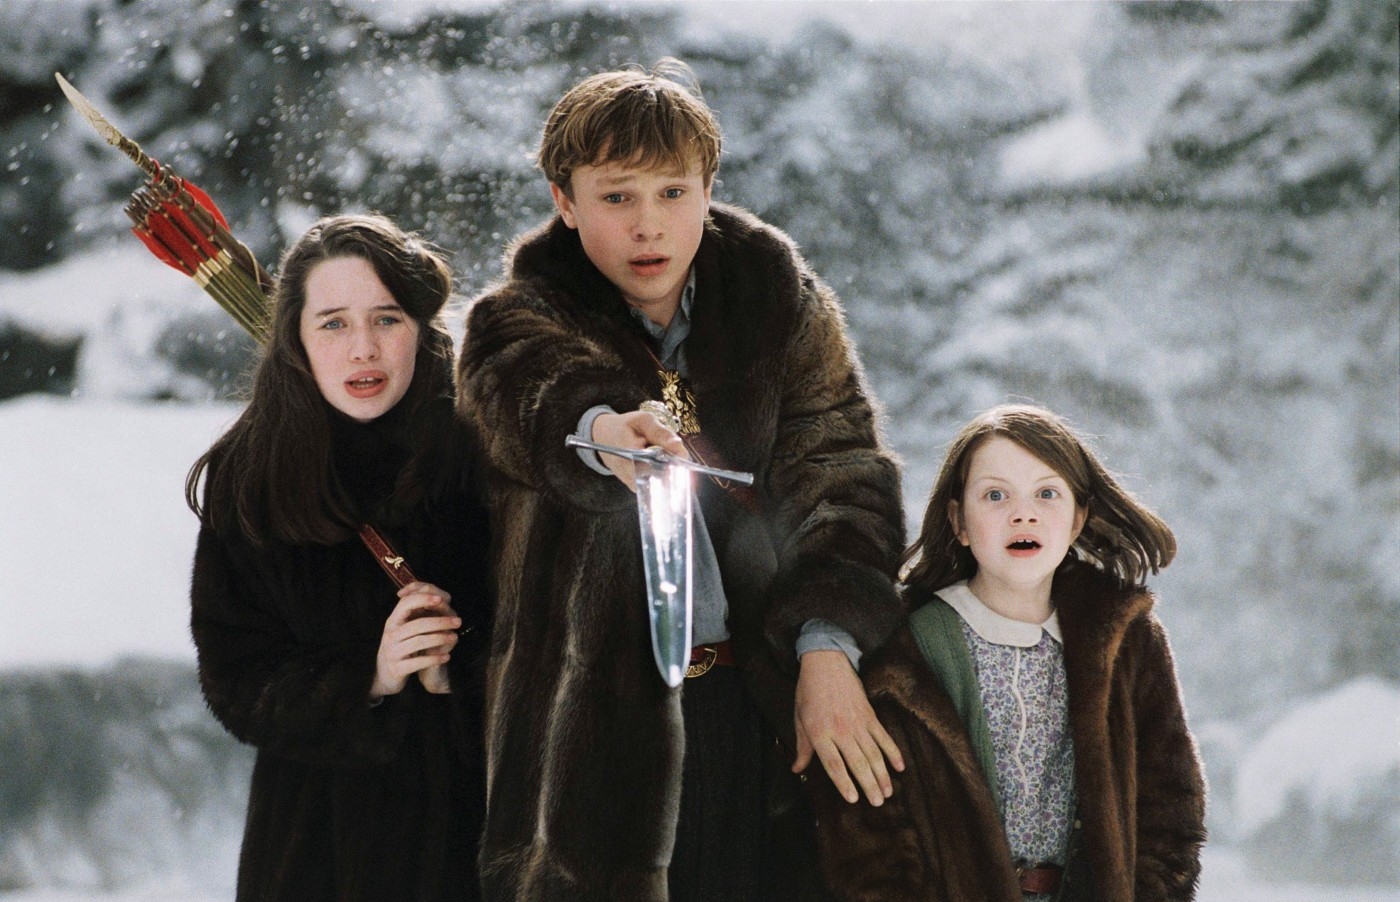 Film Cronicile Din Narnia 1 Online Subtitrat Imagini The Chronicles of Narnia: The Lion, the Witch and the Wardrobe